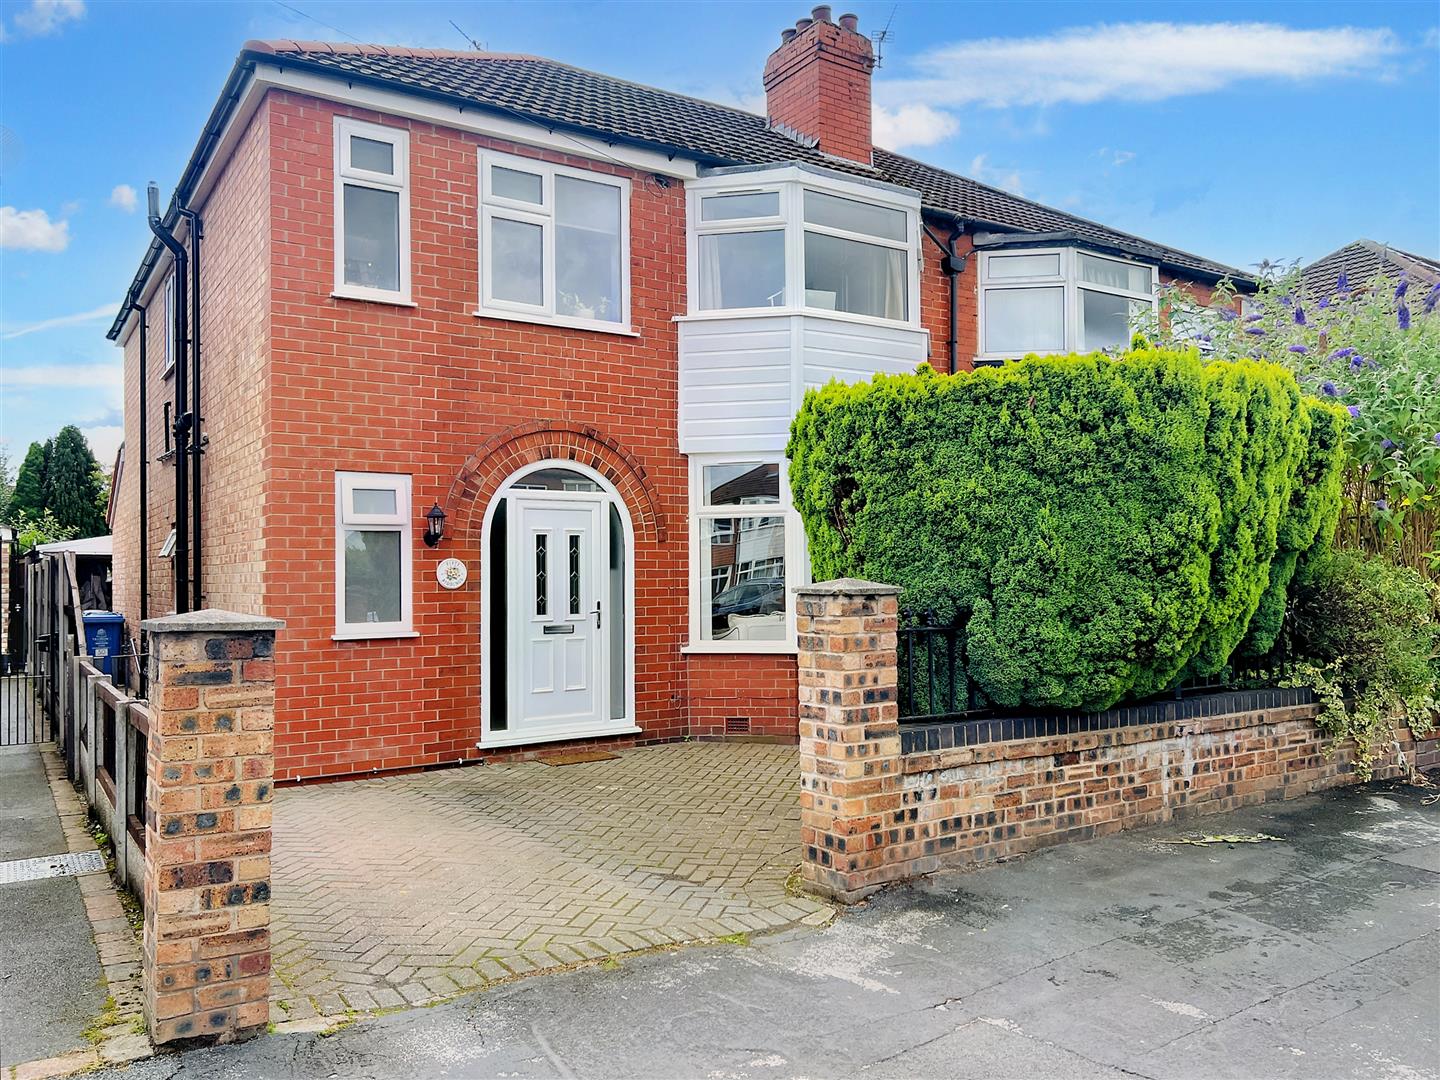 4 bed semi-detached house for sale in Riddings Road, Altrincham - Property Image 1